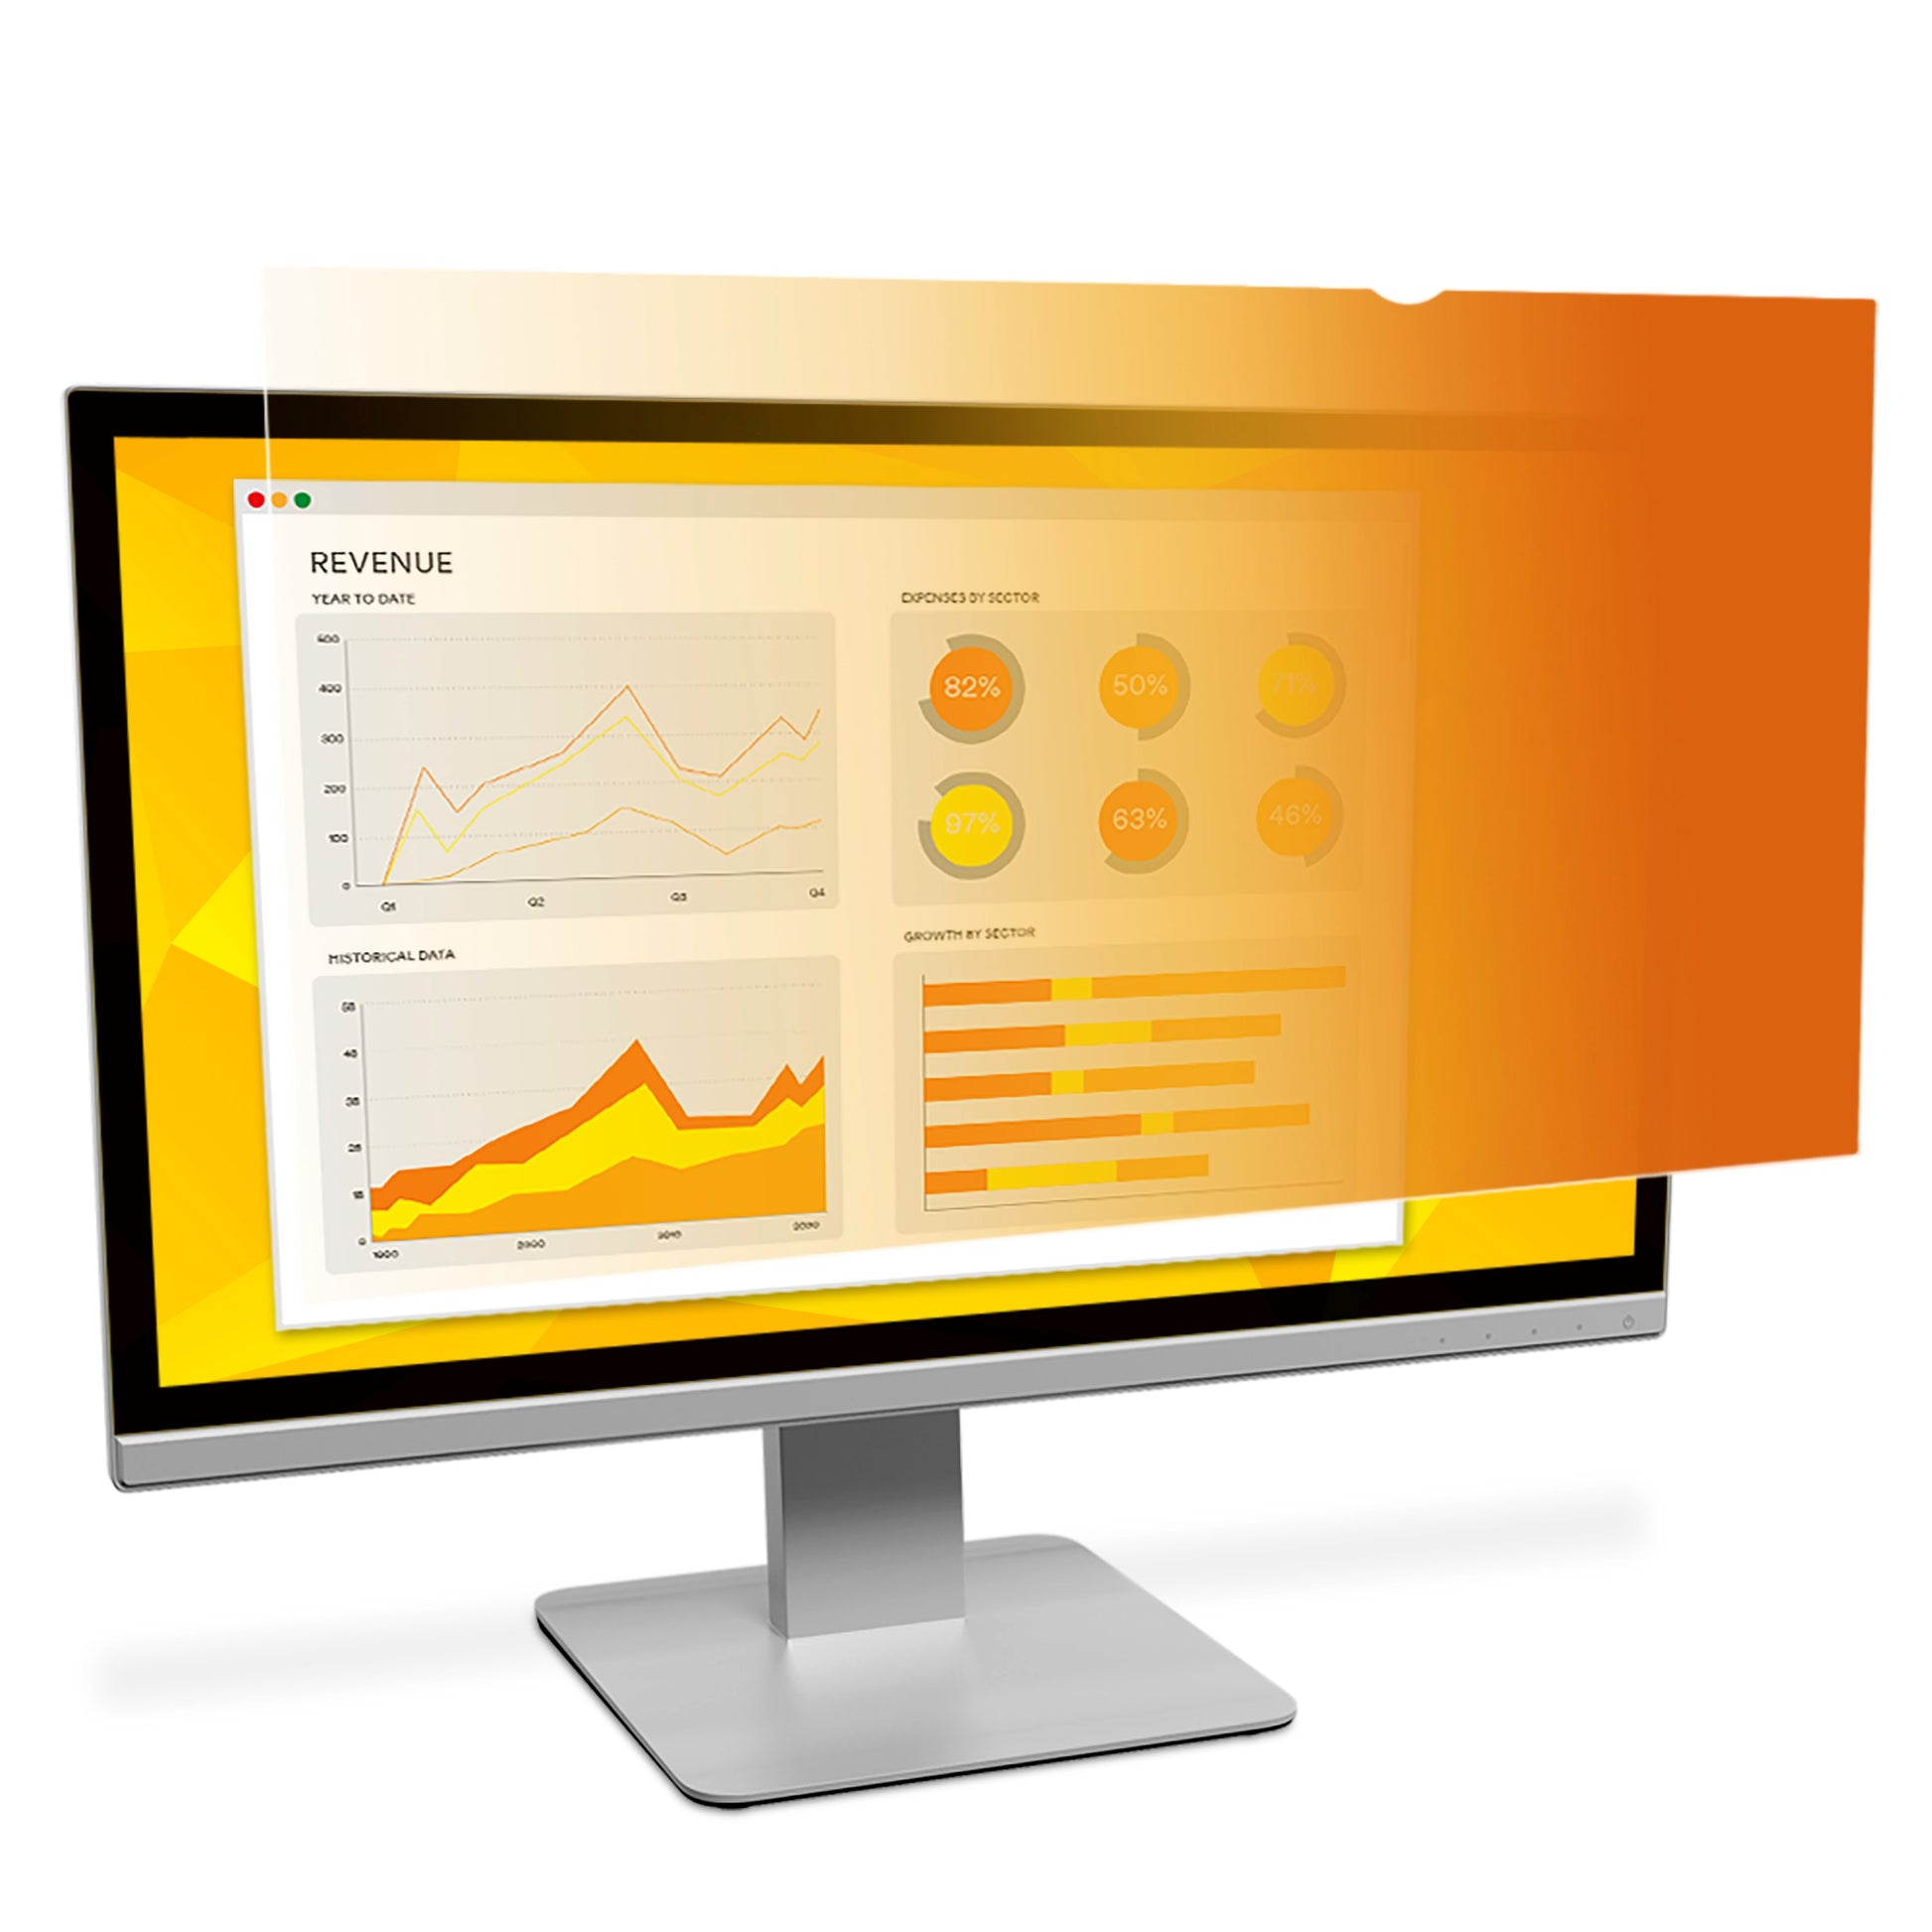 3M™ Gold Privacy Filter for 17" Standard Monitor (GF170C4B) - TechExpress 